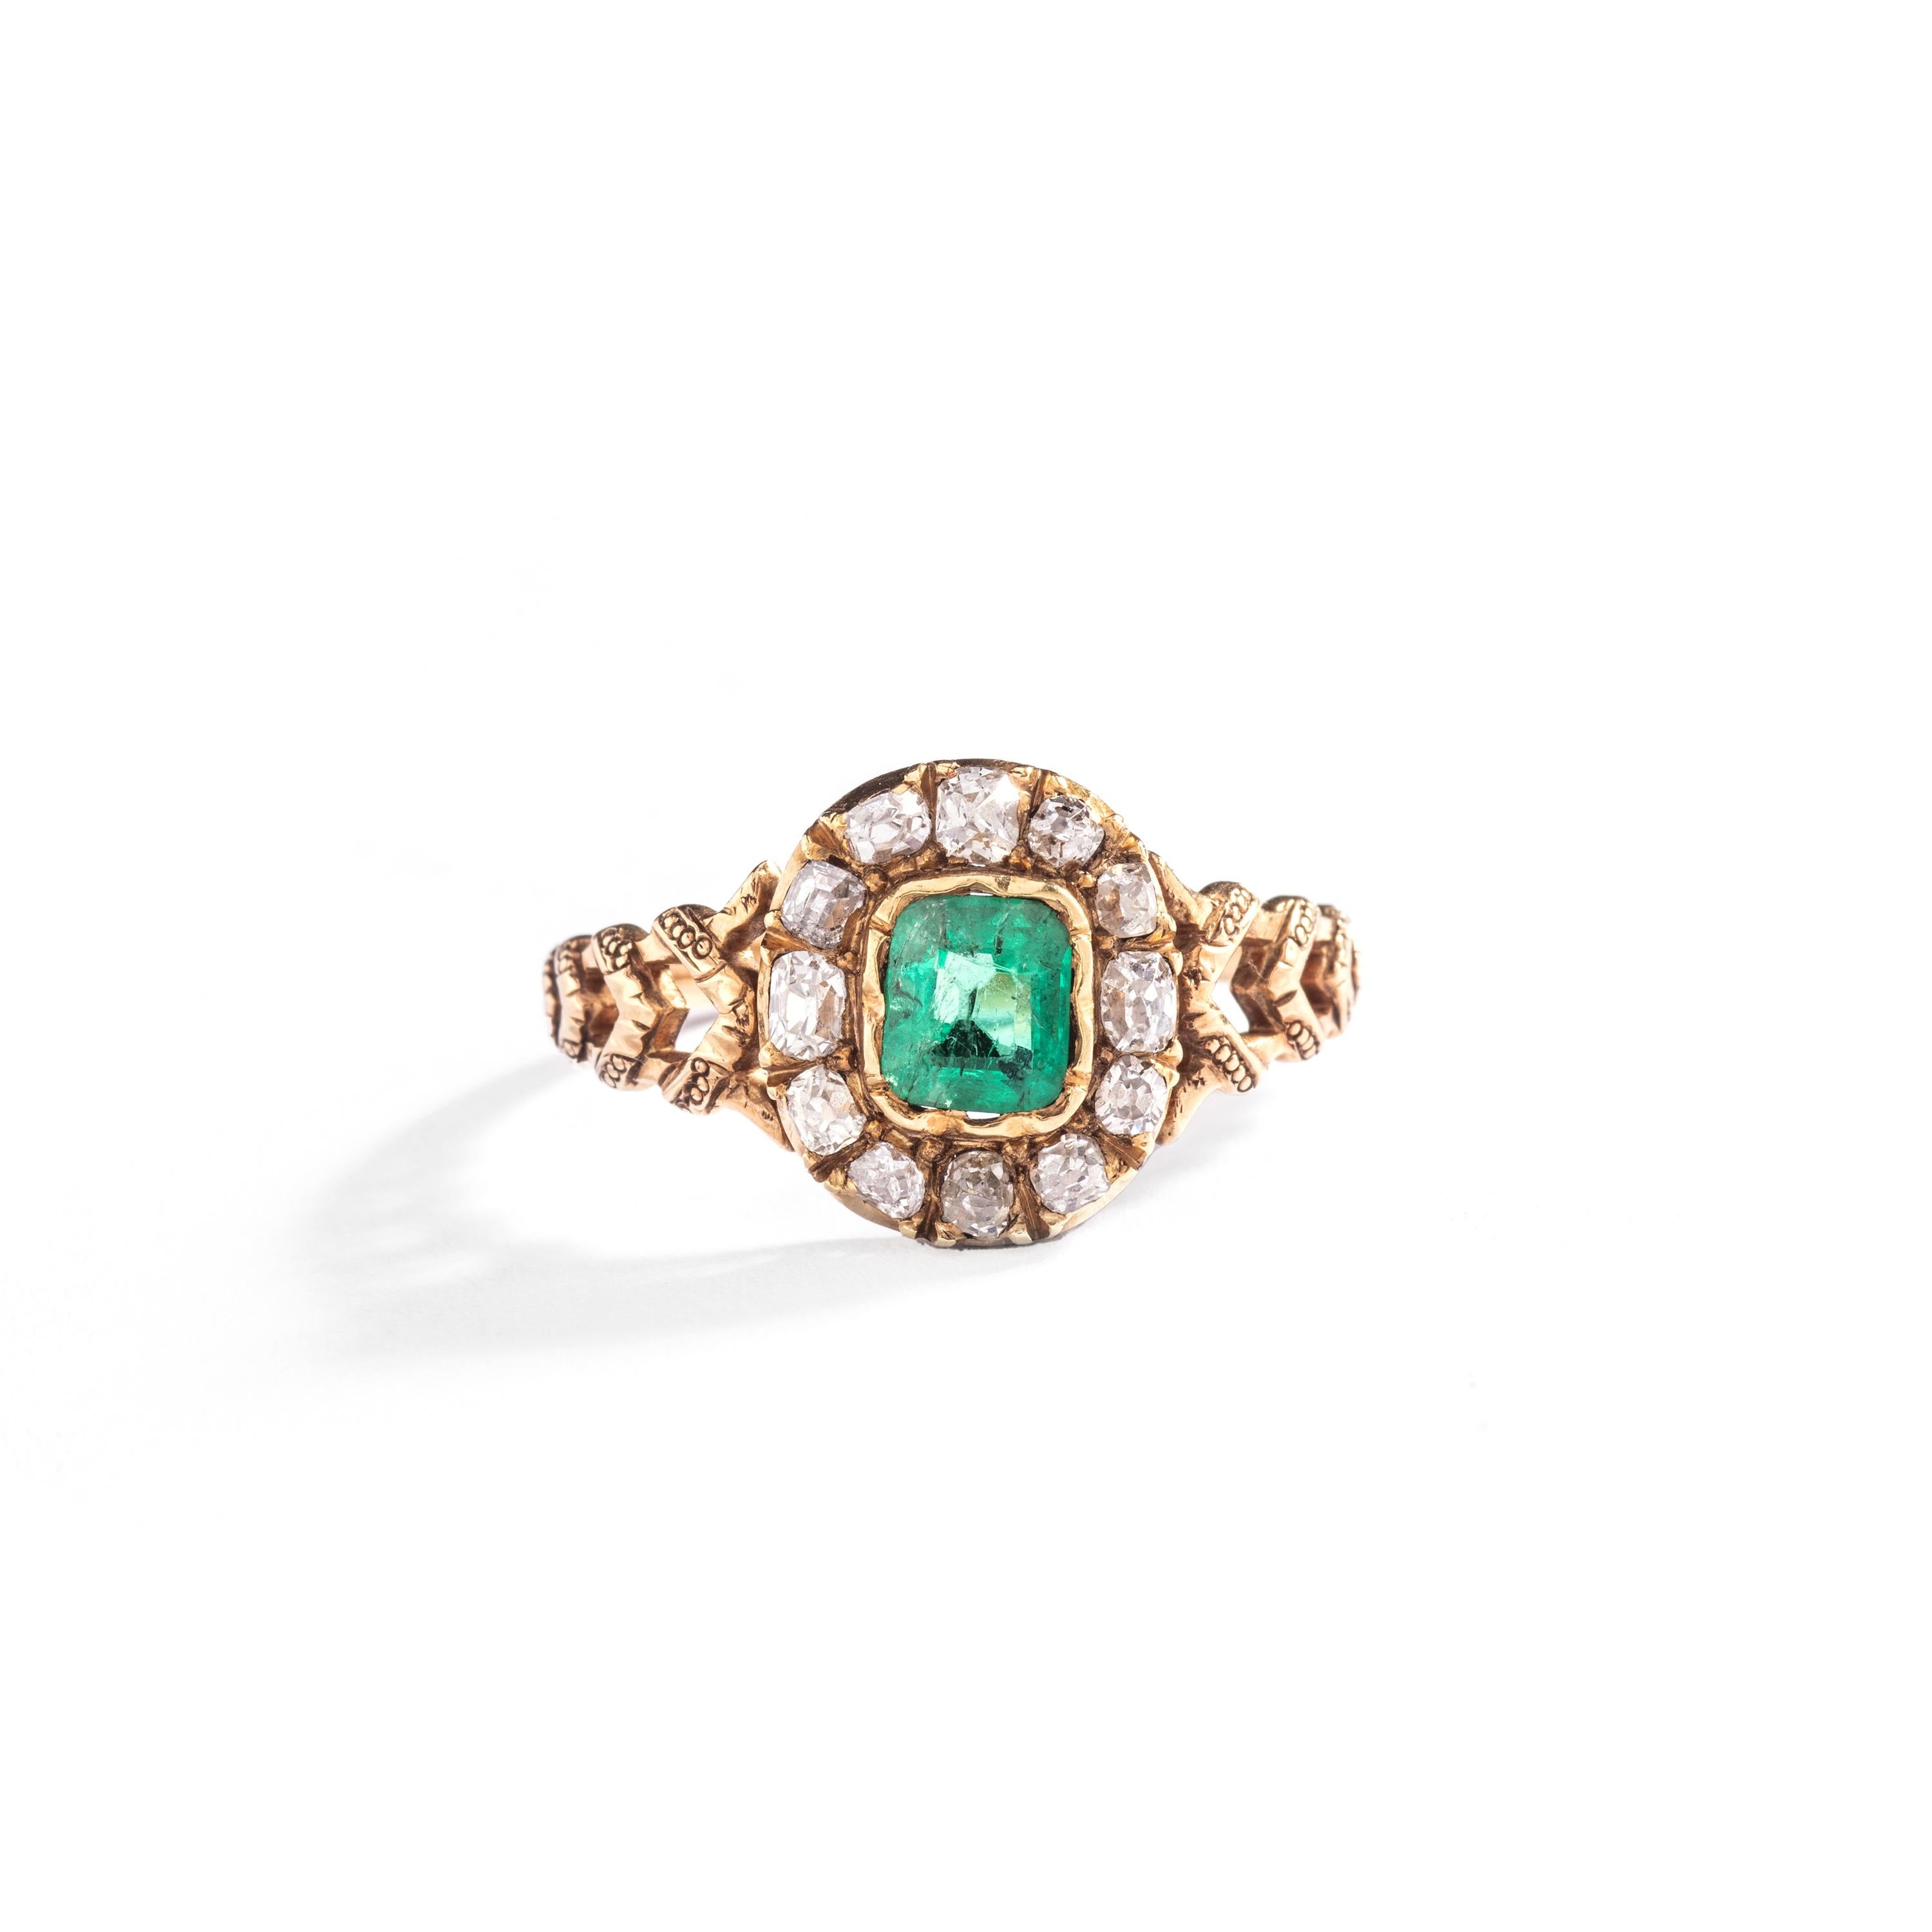 Presenting an exquisite piece of history, we have an antique emerald-cut emerald mounted in an engraved yellow gold ring surrounded by old mine diamonds.

This captivating ring dates back to the late 19th century, showcasing the grandeur and